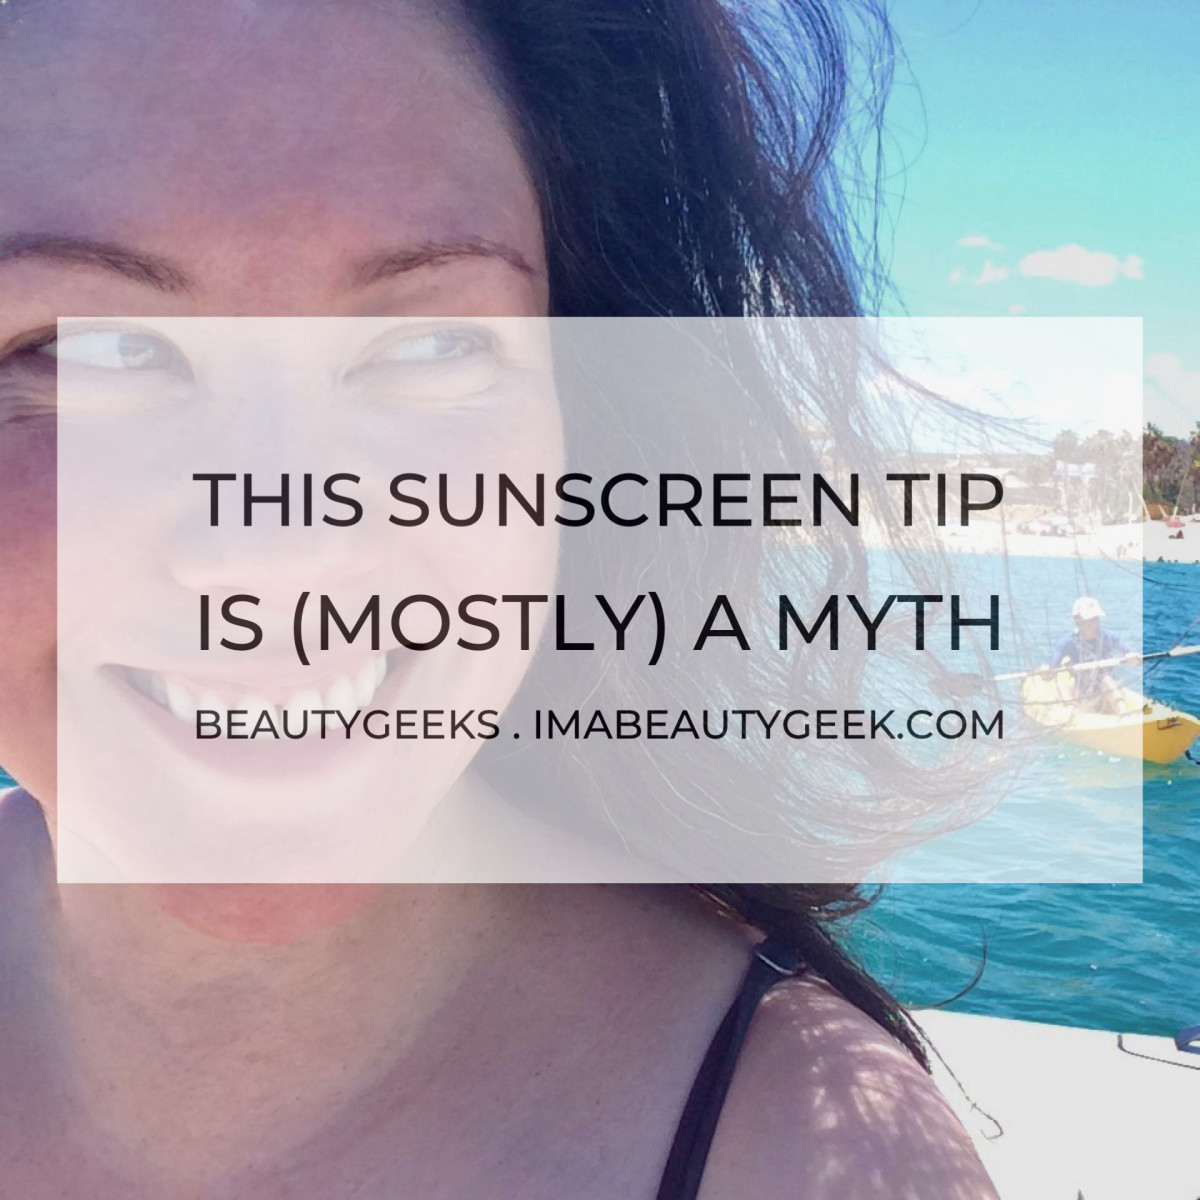 MYTH: you have to wait 15 to 30 minutes for skin to absorb sunscreen before sun exposure in order to be fully protected against UV